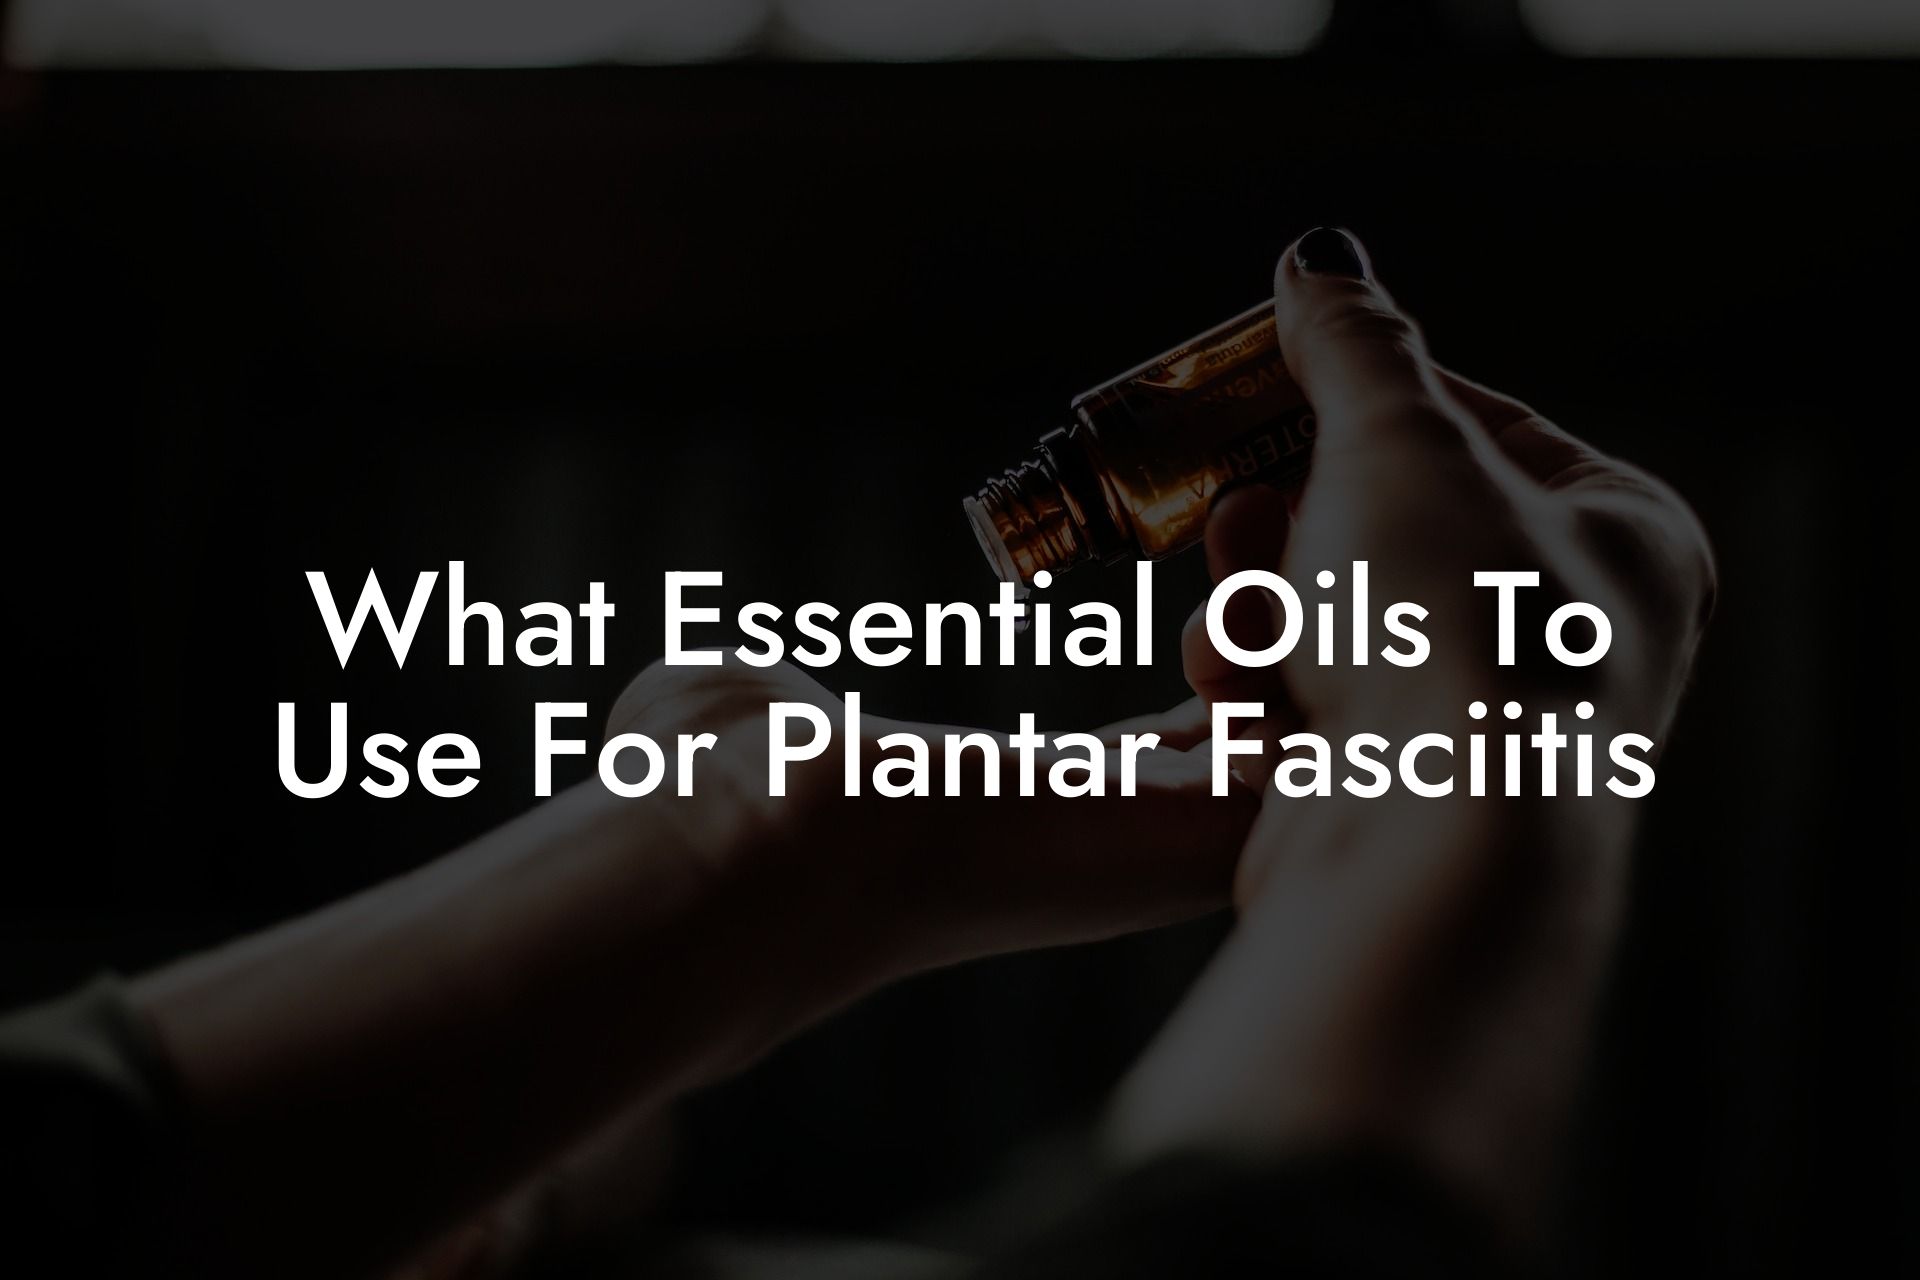 What Essential Oils To Use For Plantar Fasciitis